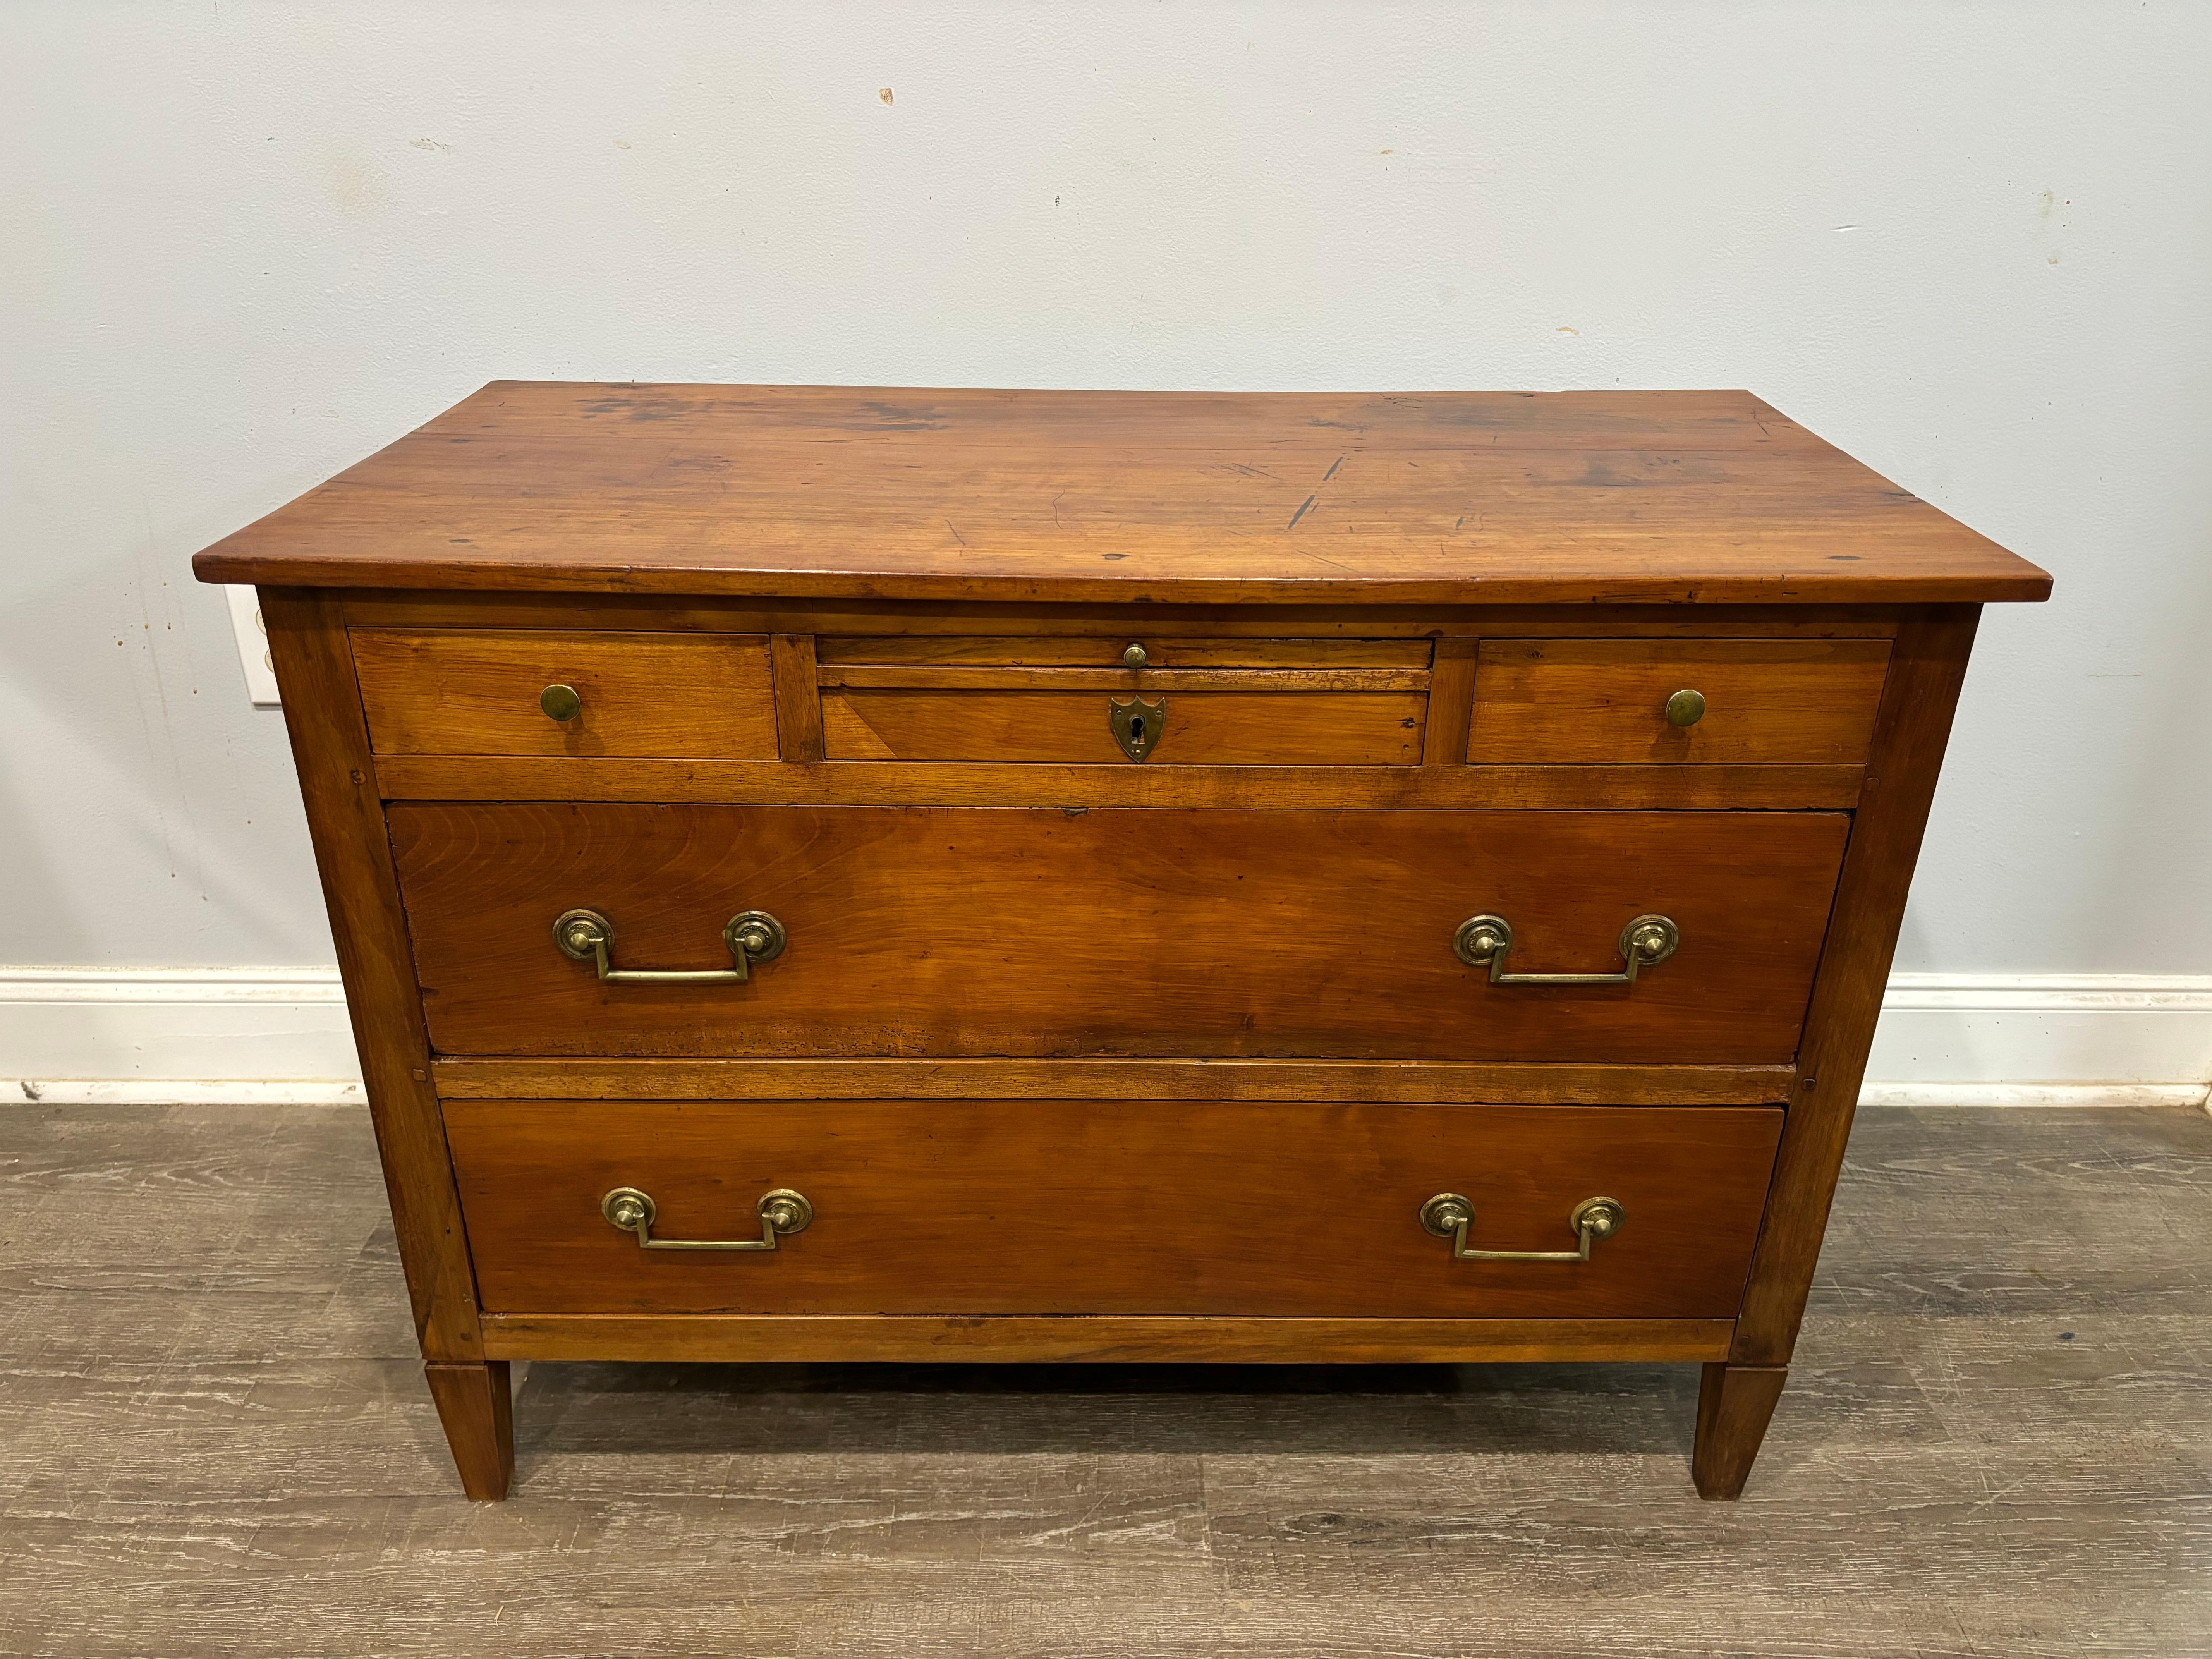 This 18th century Louis XVI Commode is made of walnut. It has a slider in the front which is unusual.